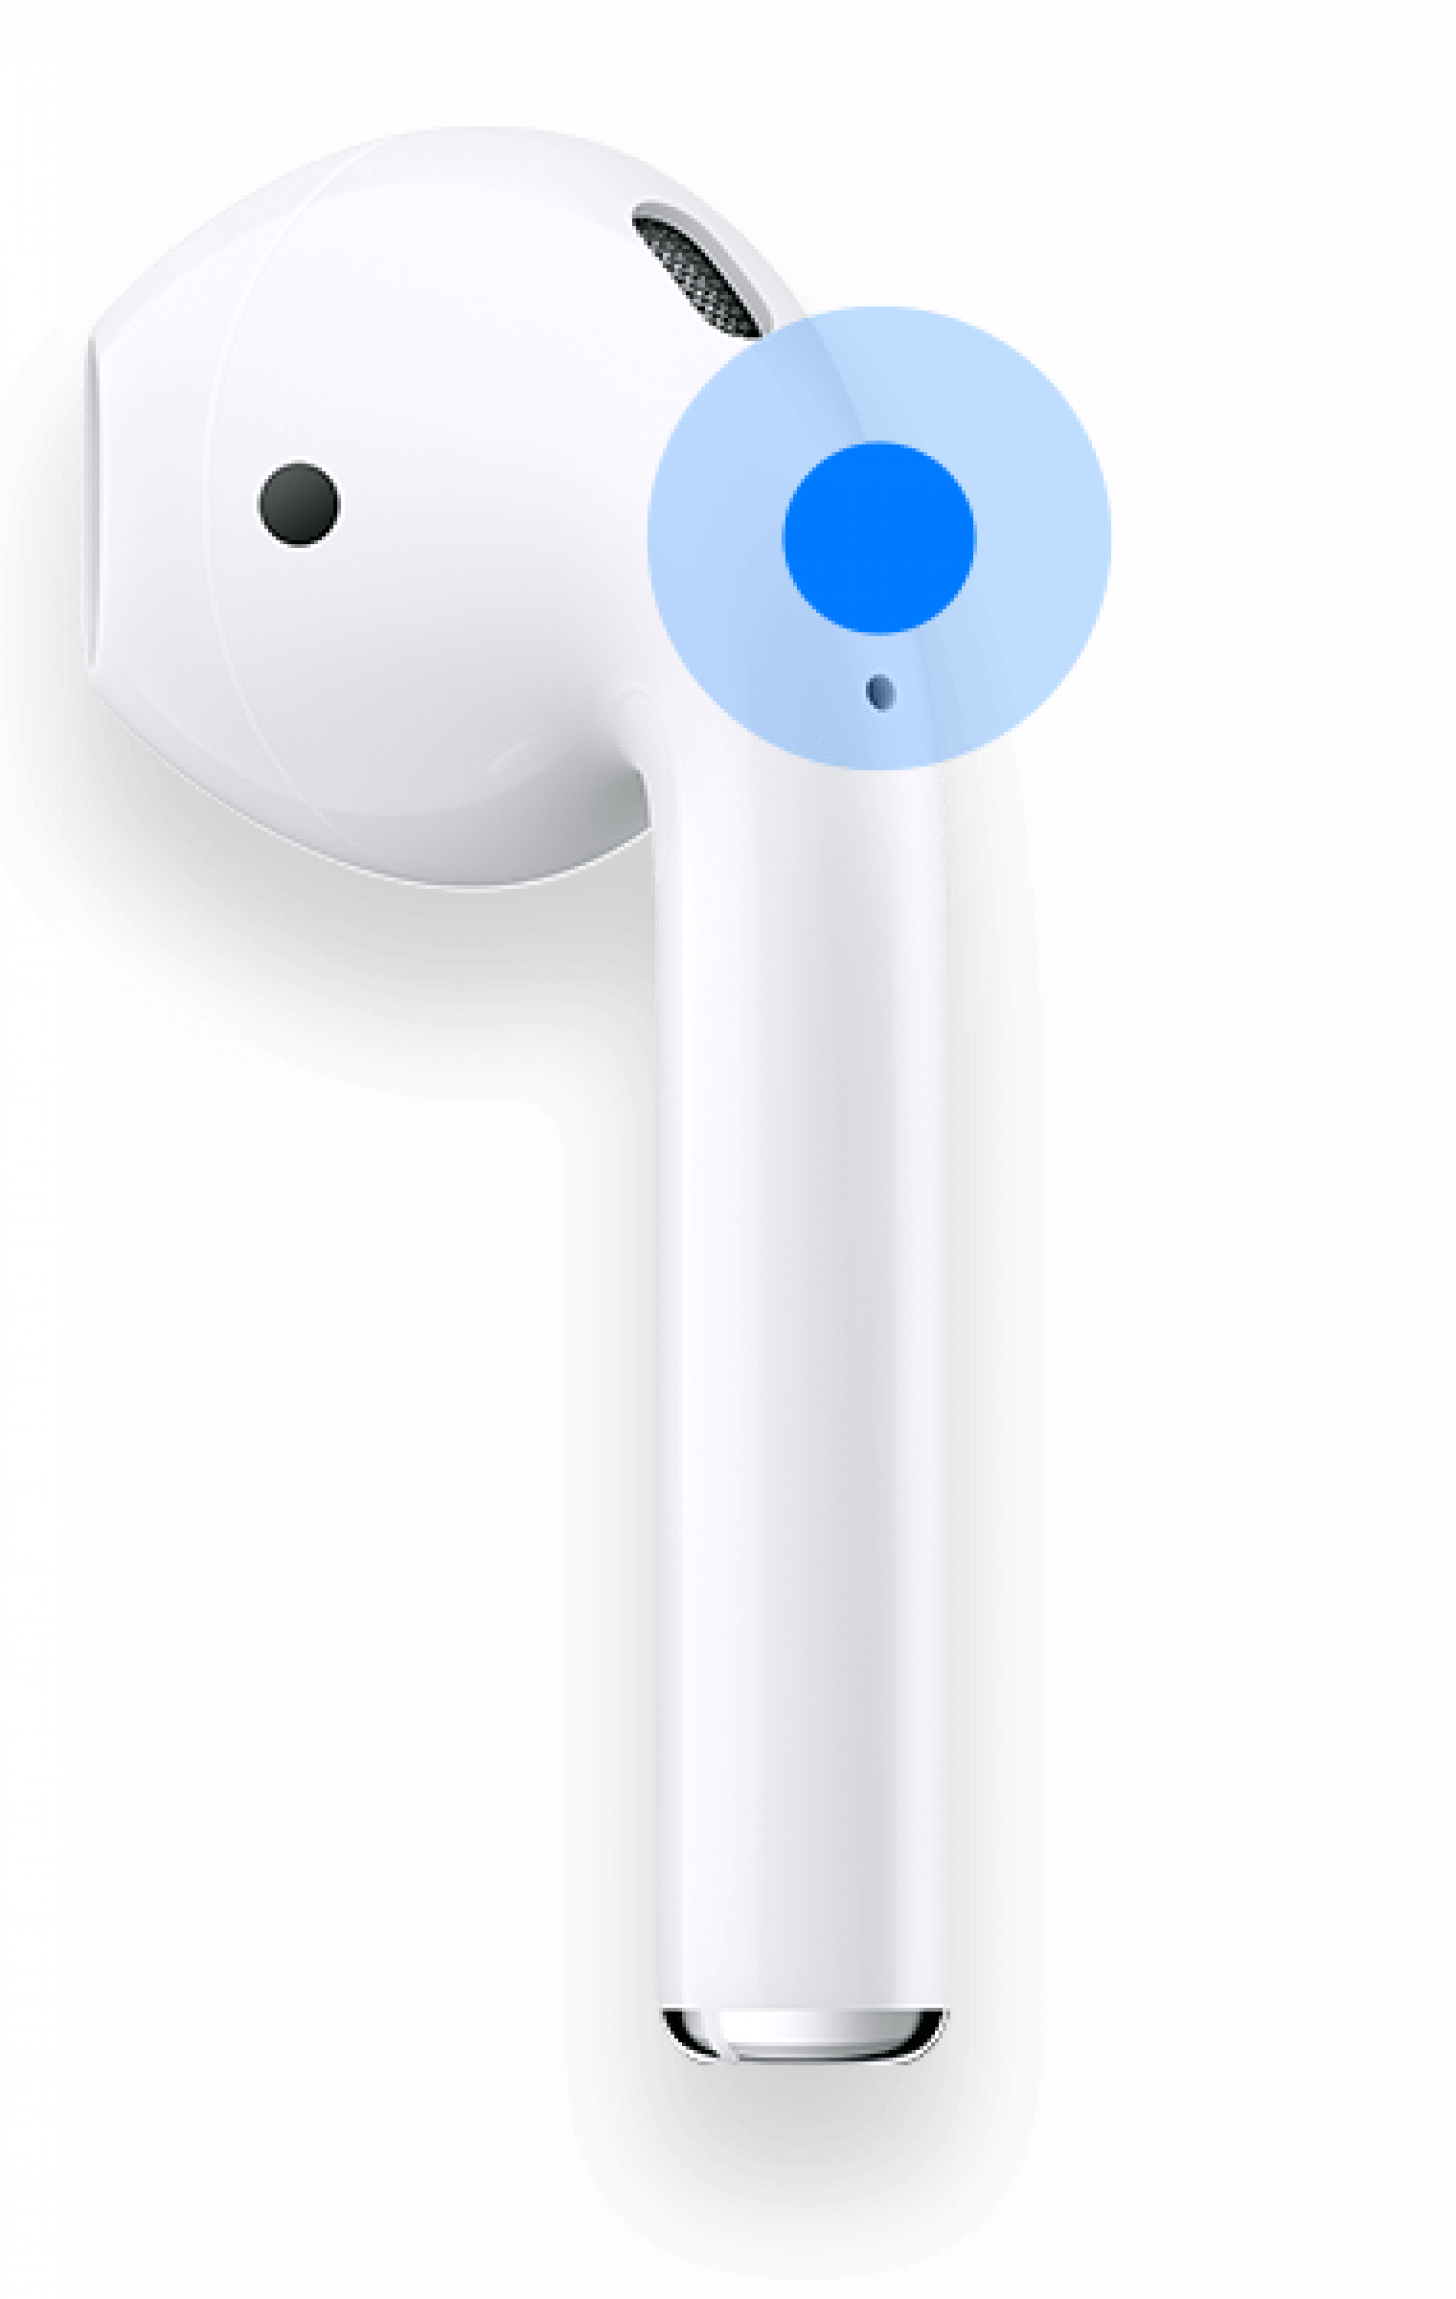 If you have 1st or 2nd-generation AirPods, this is where you should tap them: